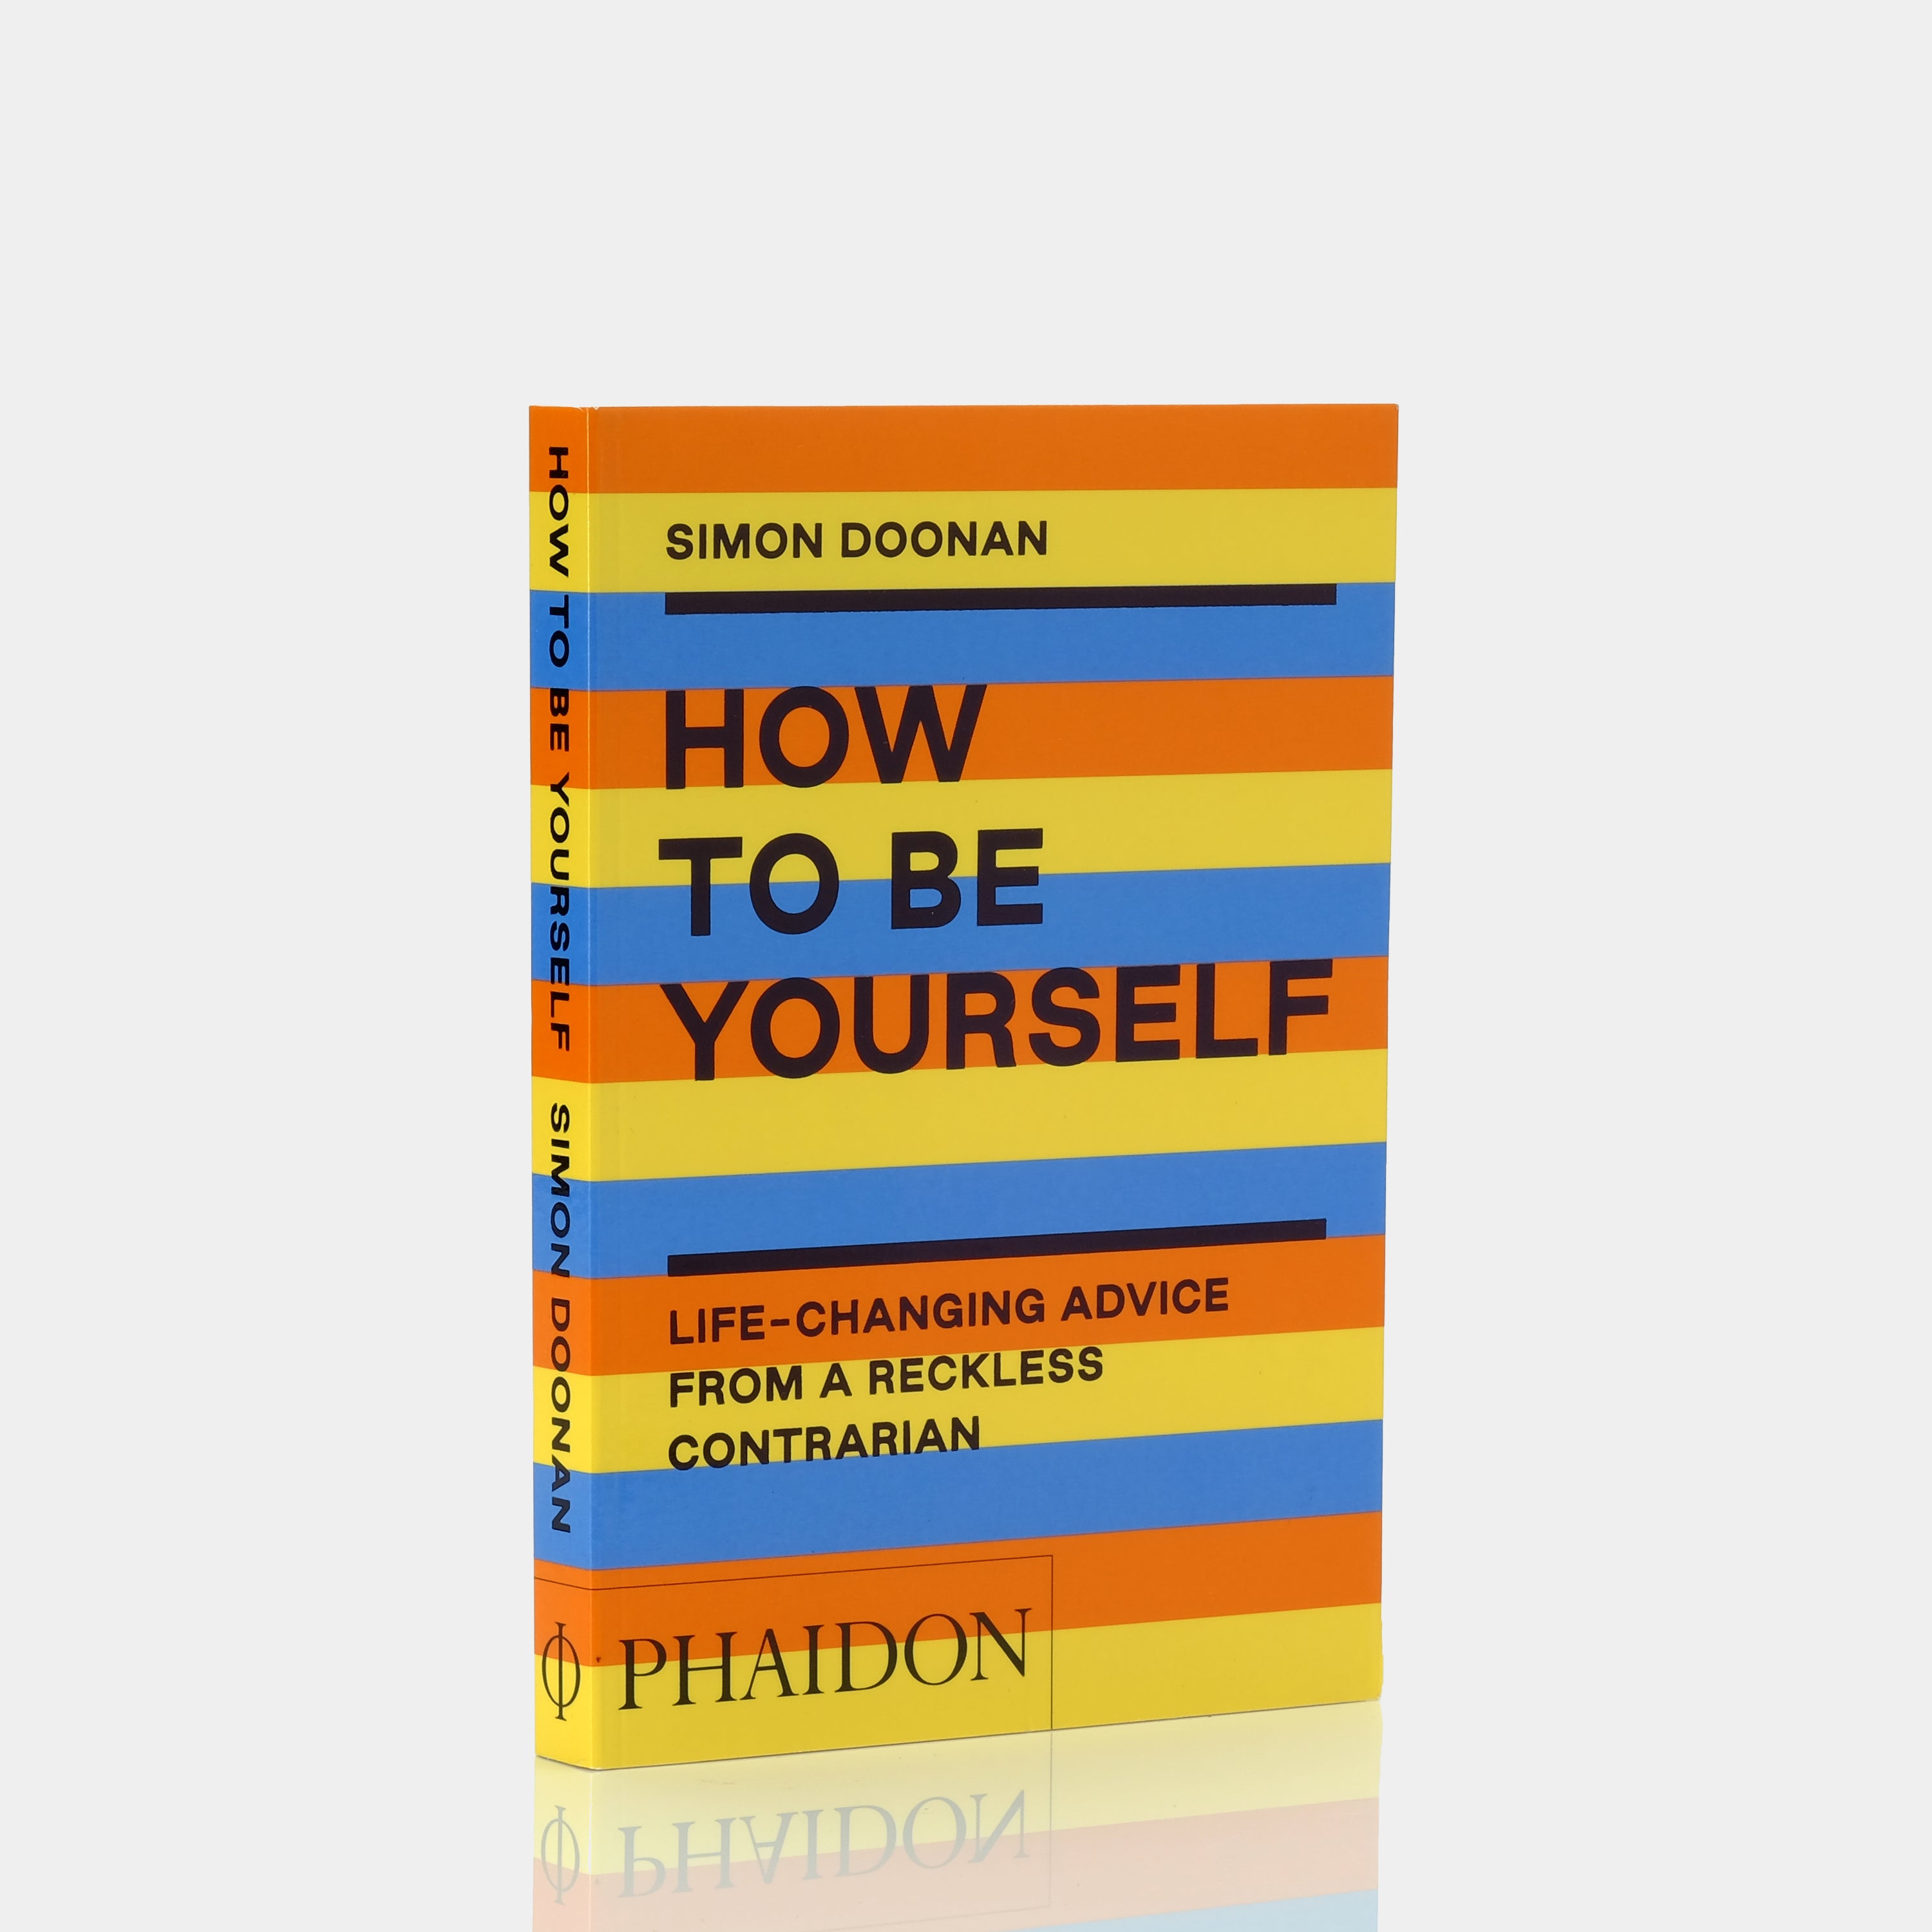 How to Be Yourself: Life-Changing Advice from a Reckless Contrarian by Simon Doonan Phaidon Book